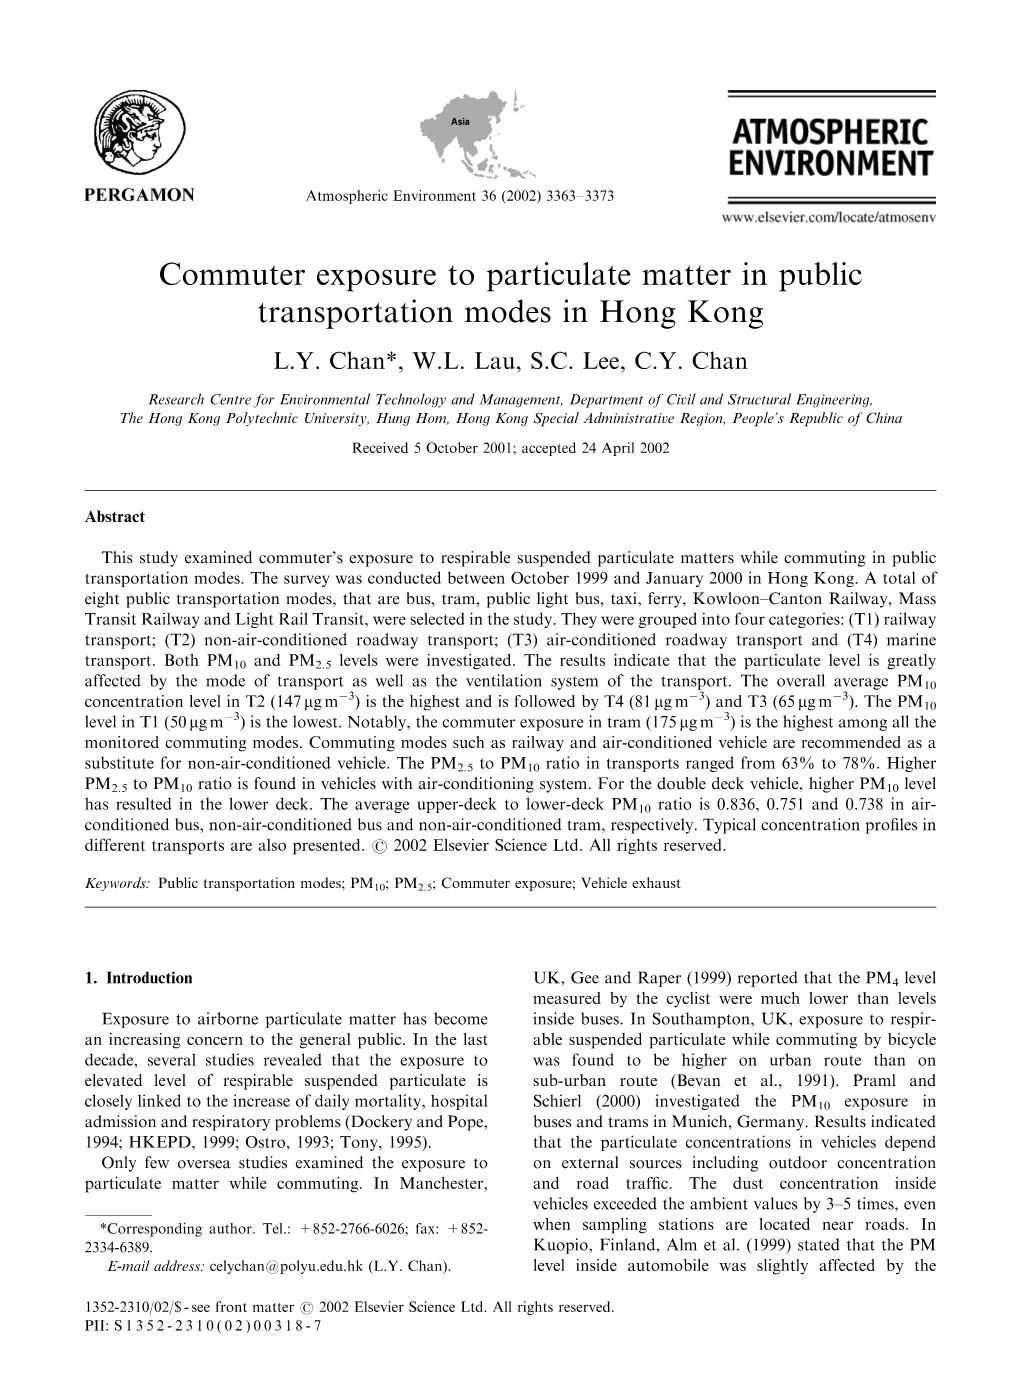 Commuter Exposure to Particulate Matter in Public Transportation Modes in Hong Kong L.Y